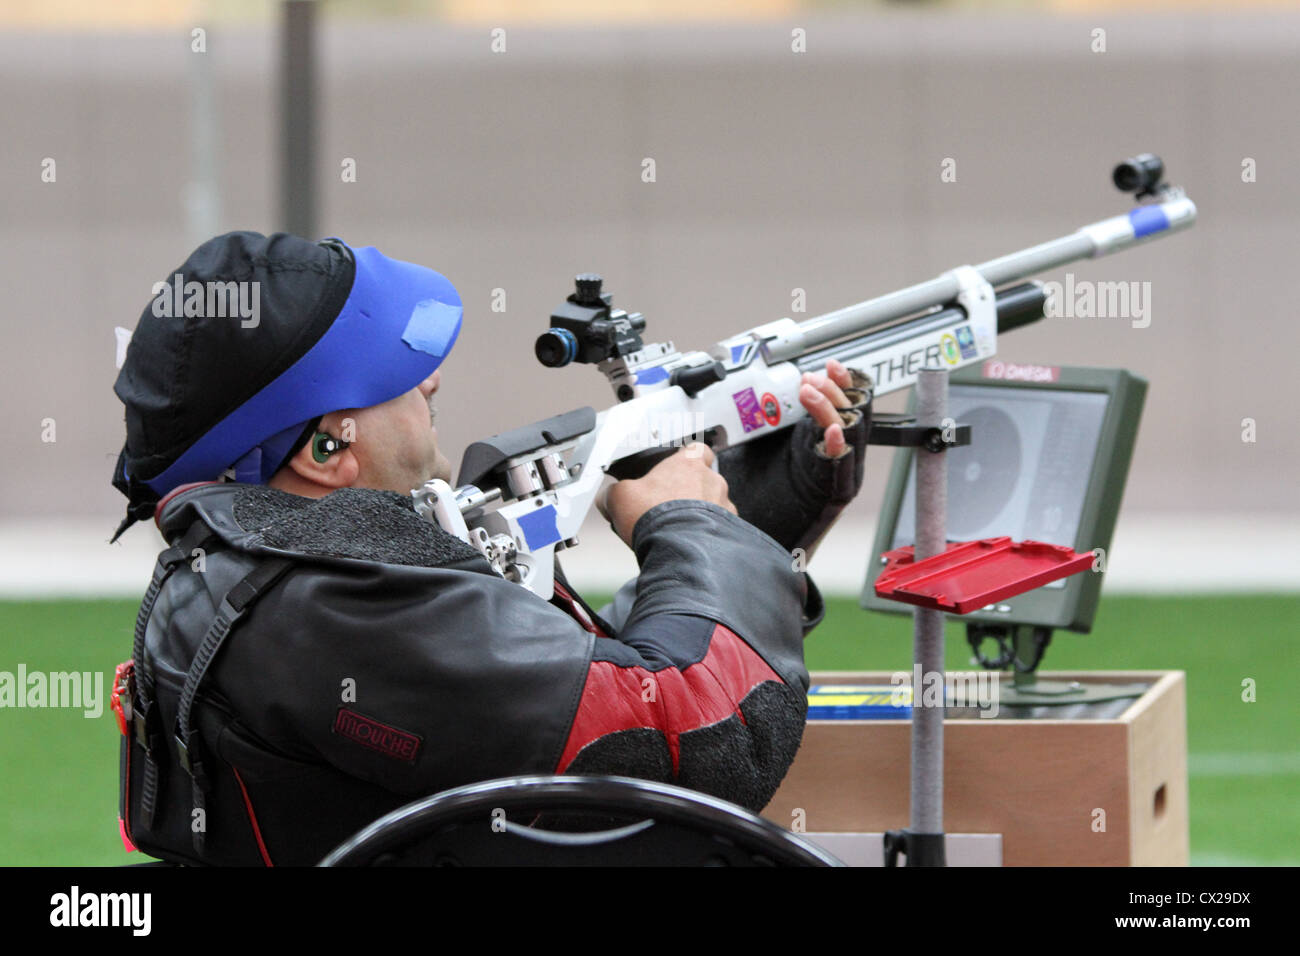 Jacopo Cappelli of Italy in the Men's R1-10m Air Rifle Standing SH1 shooting competition at the Royal artillery barracks. Stock Photo